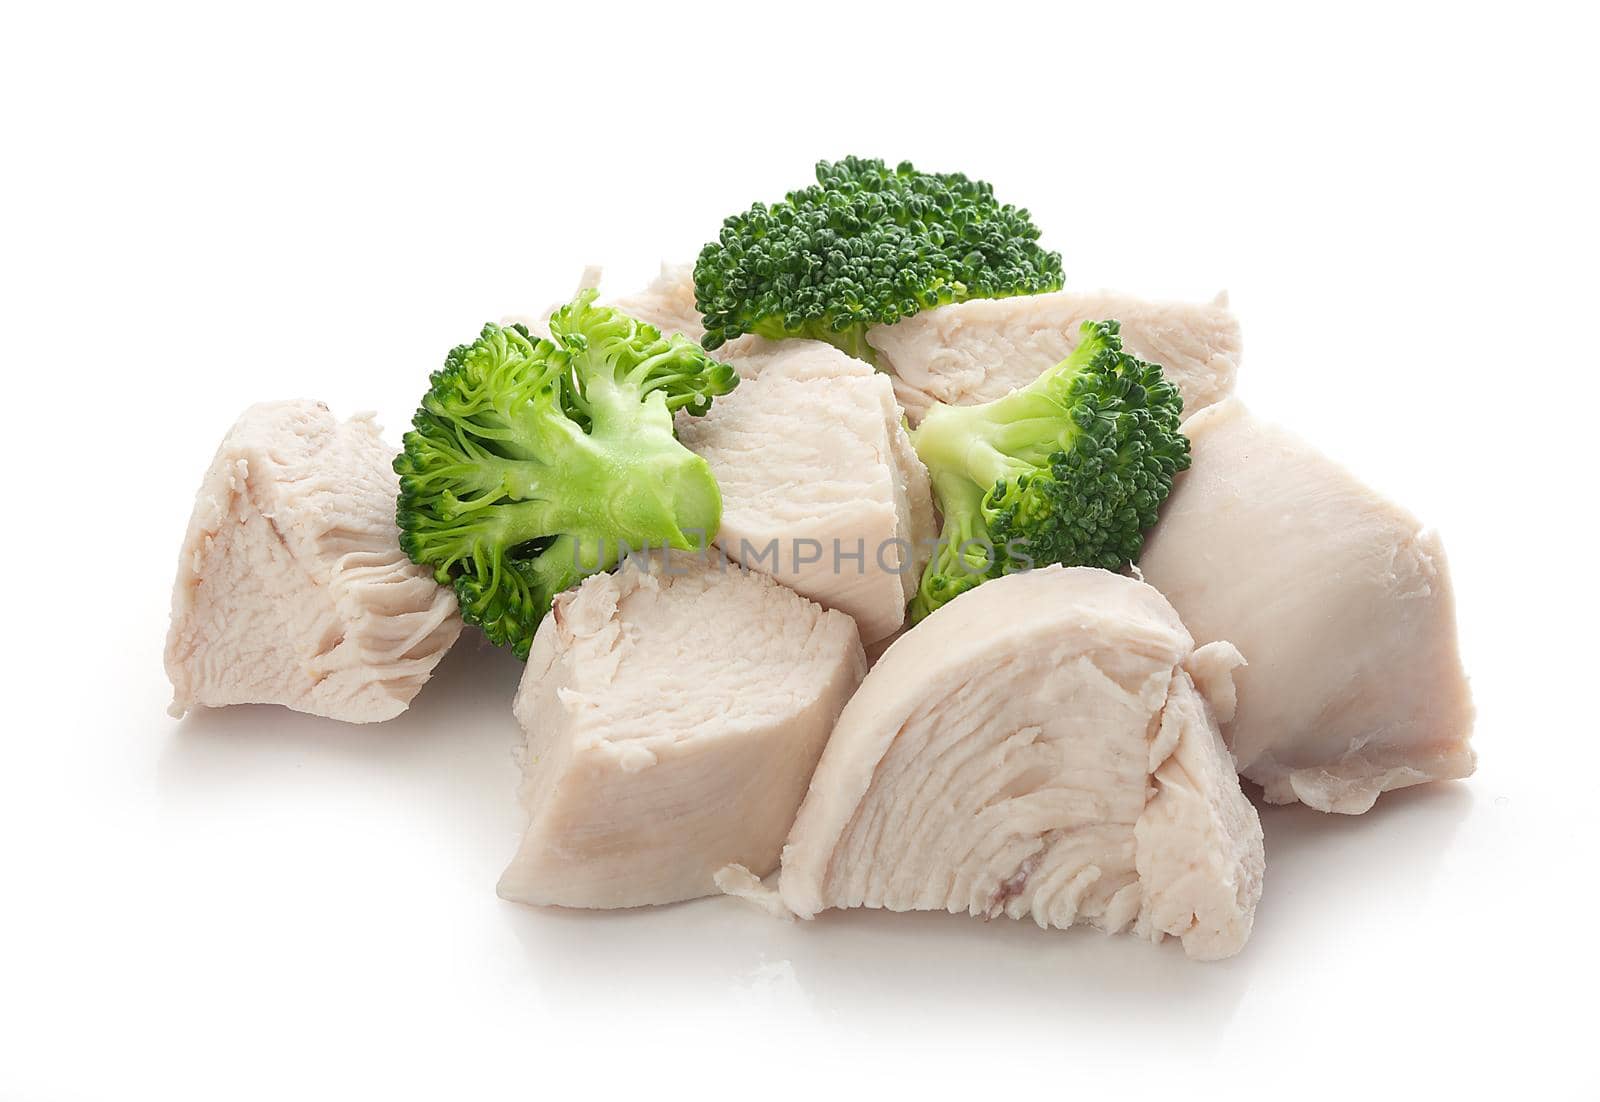 Prepared chicken pieces with broccoli by Angorius